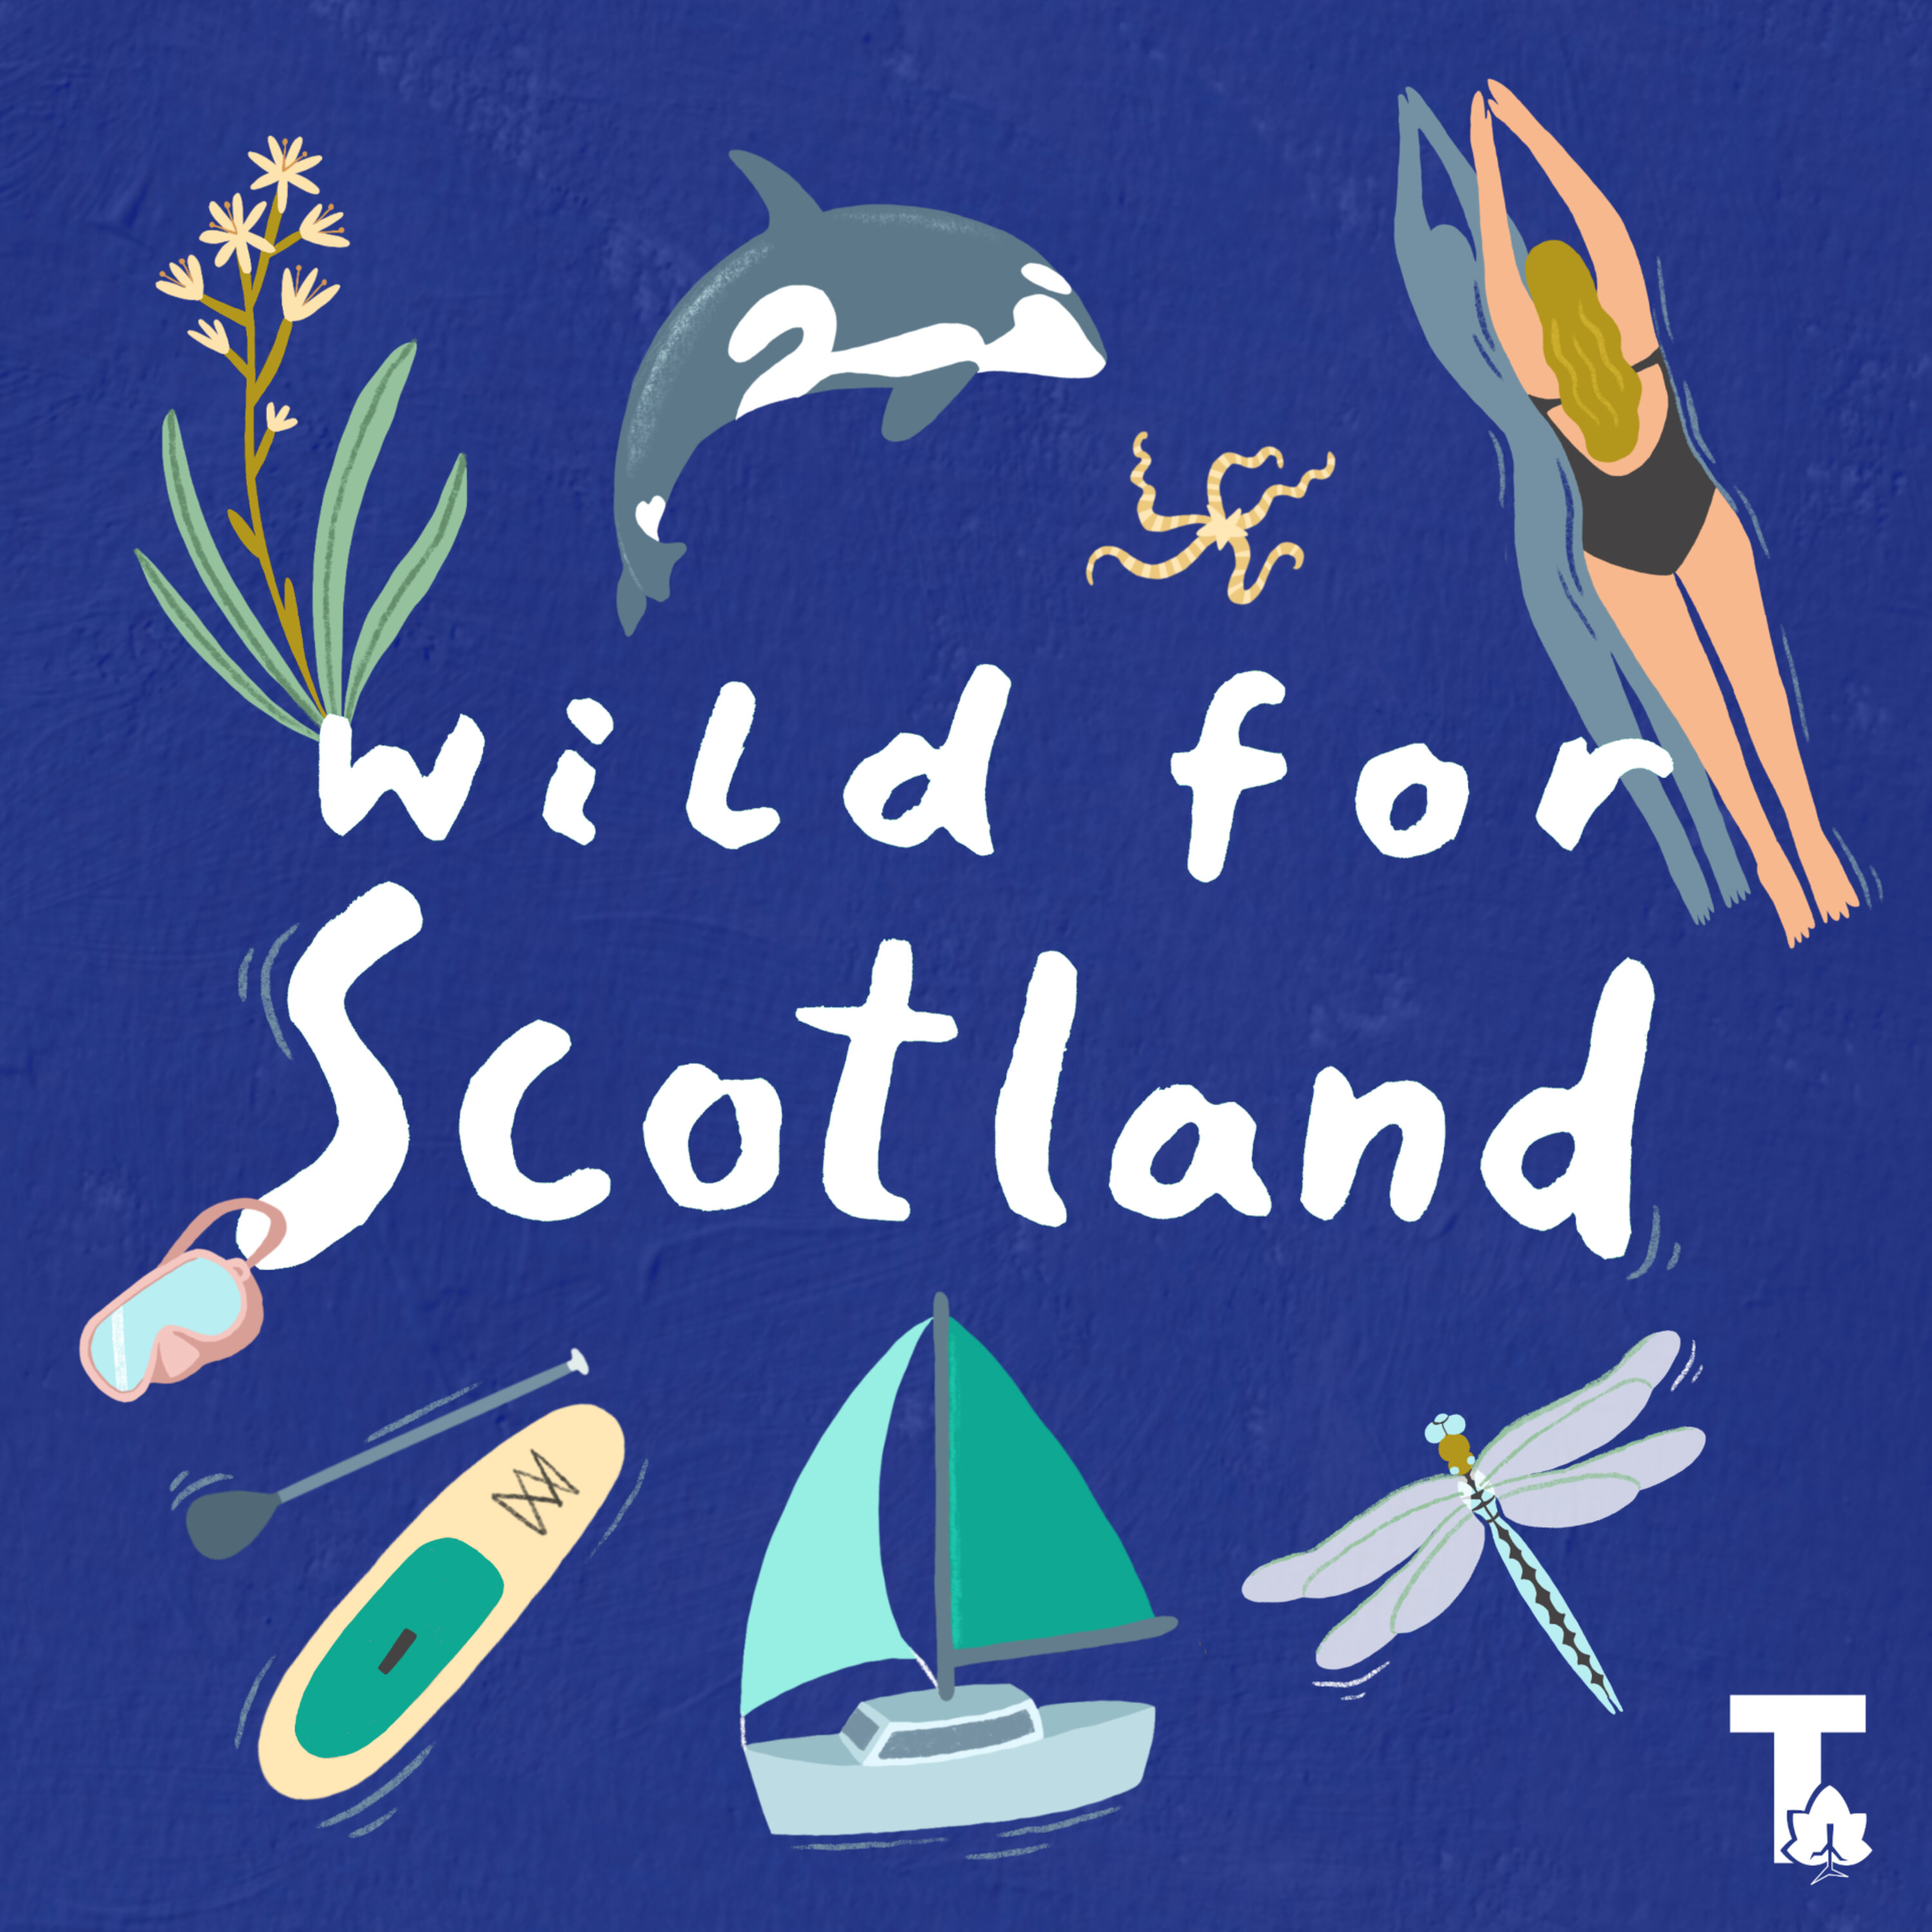 Featured Episode from Wild for Scotland, an Immersive Travel Podcast Featuring Inspiring Stories from Scotland